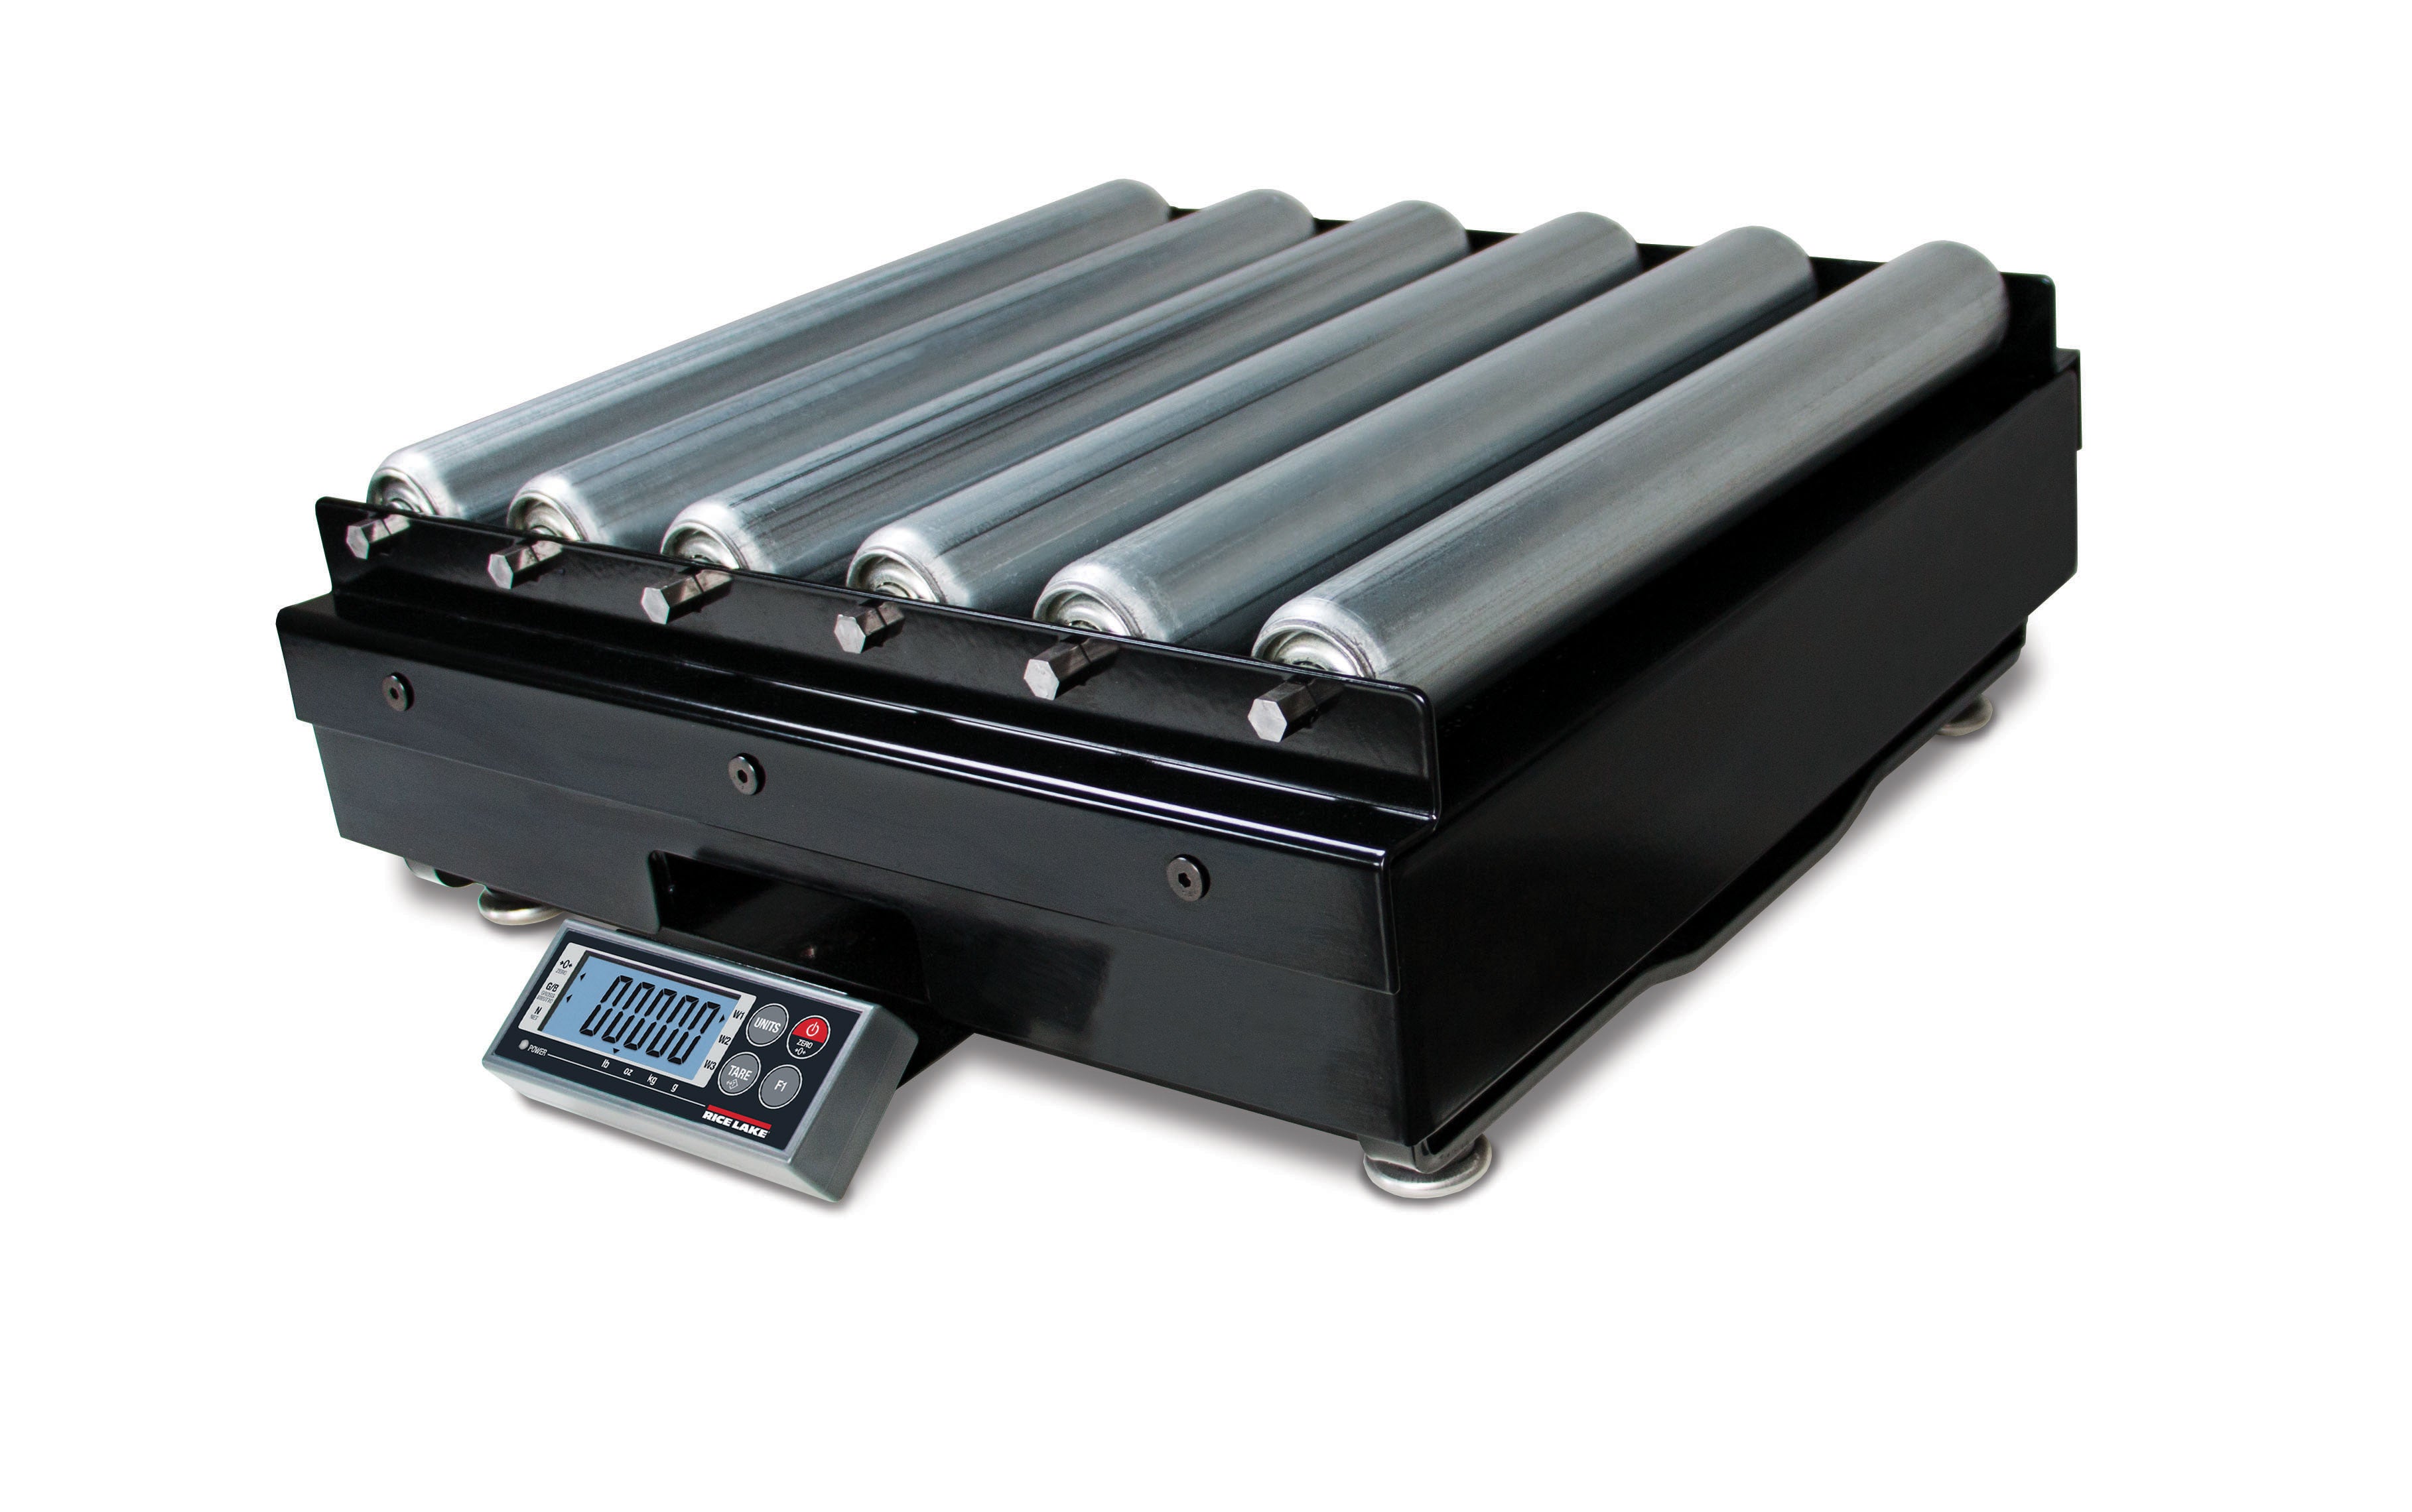 Rice Lake 182381 150 x 0.05lb/75 x 0.02kg, BP 1818-75S Shipping Digital Scale, Roller Conveyor Top with 2 years Warranty